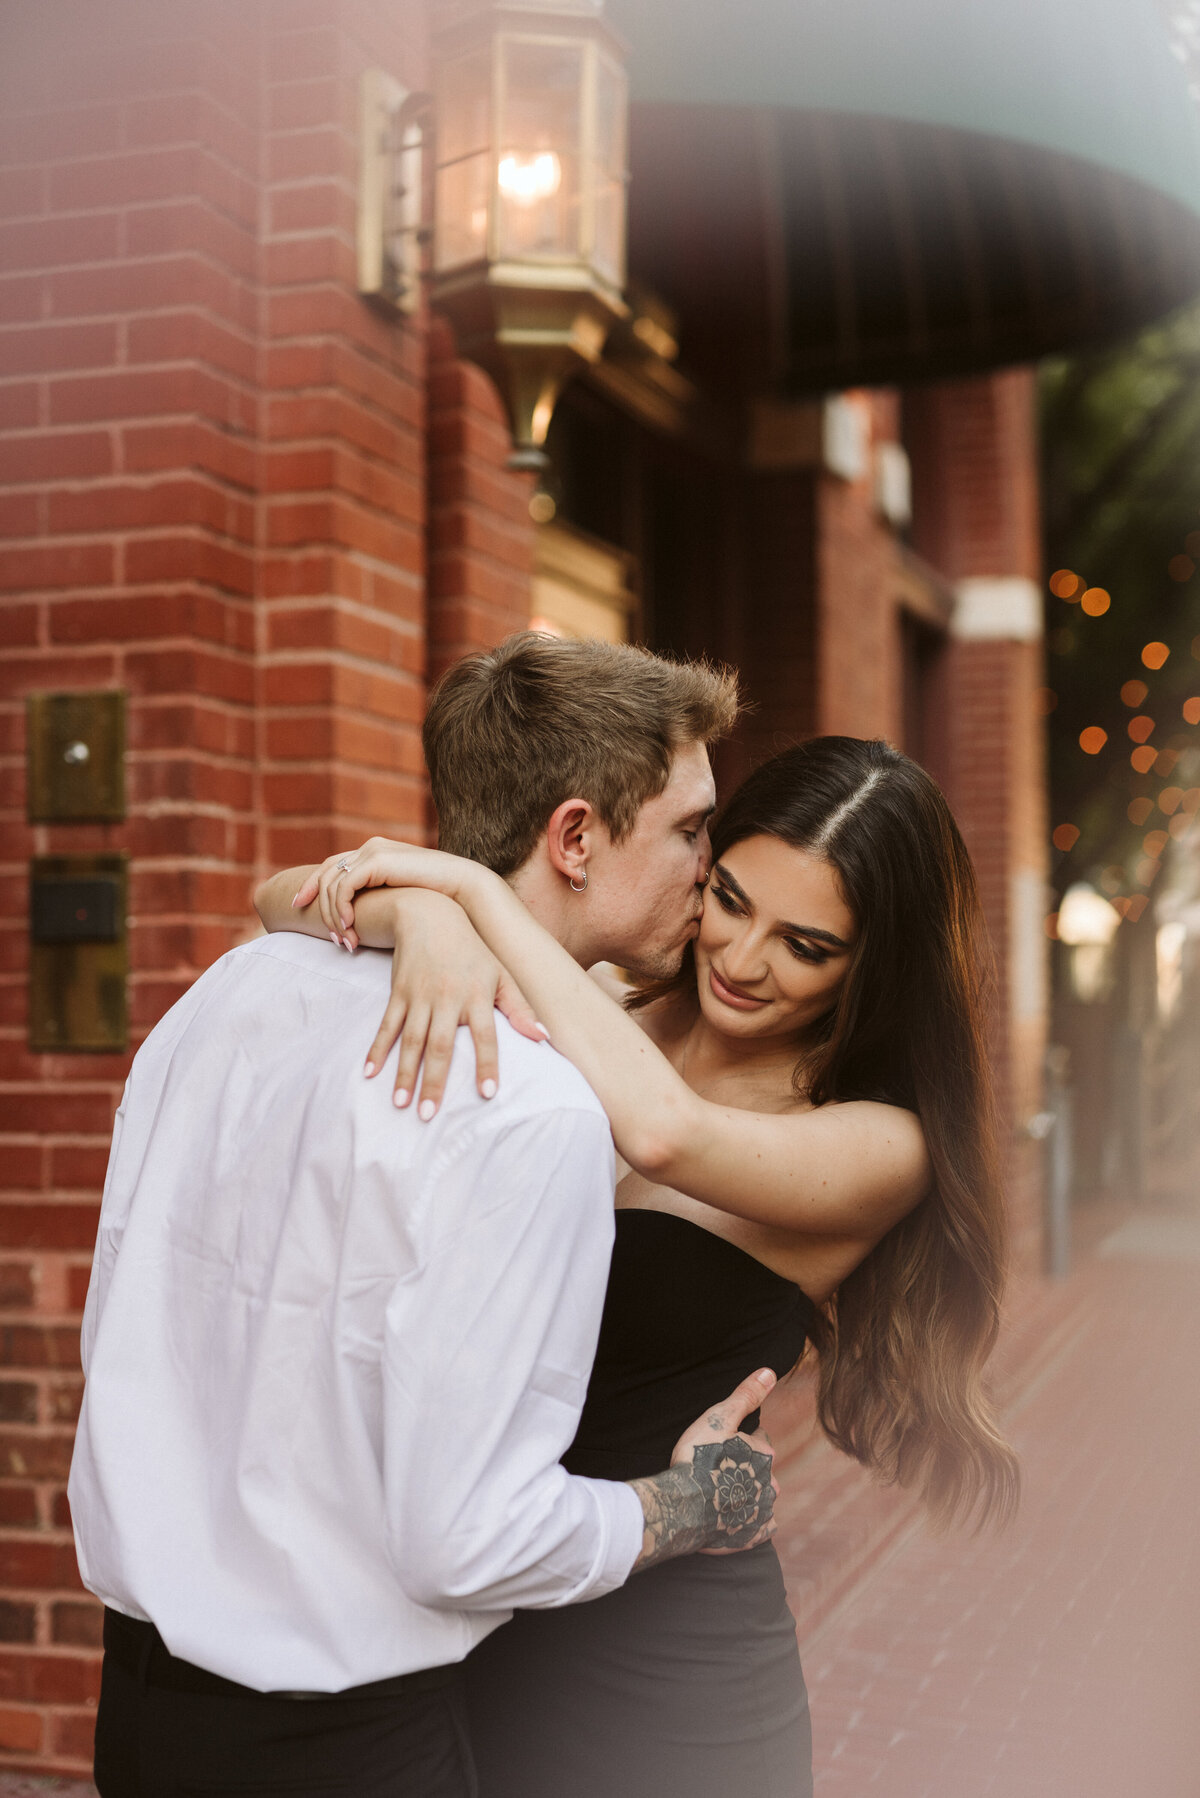 Natalie-and-Codi-engagement-session-at-sundance-sqaure-fort-worth-by-bruna-kitchen-photography-18